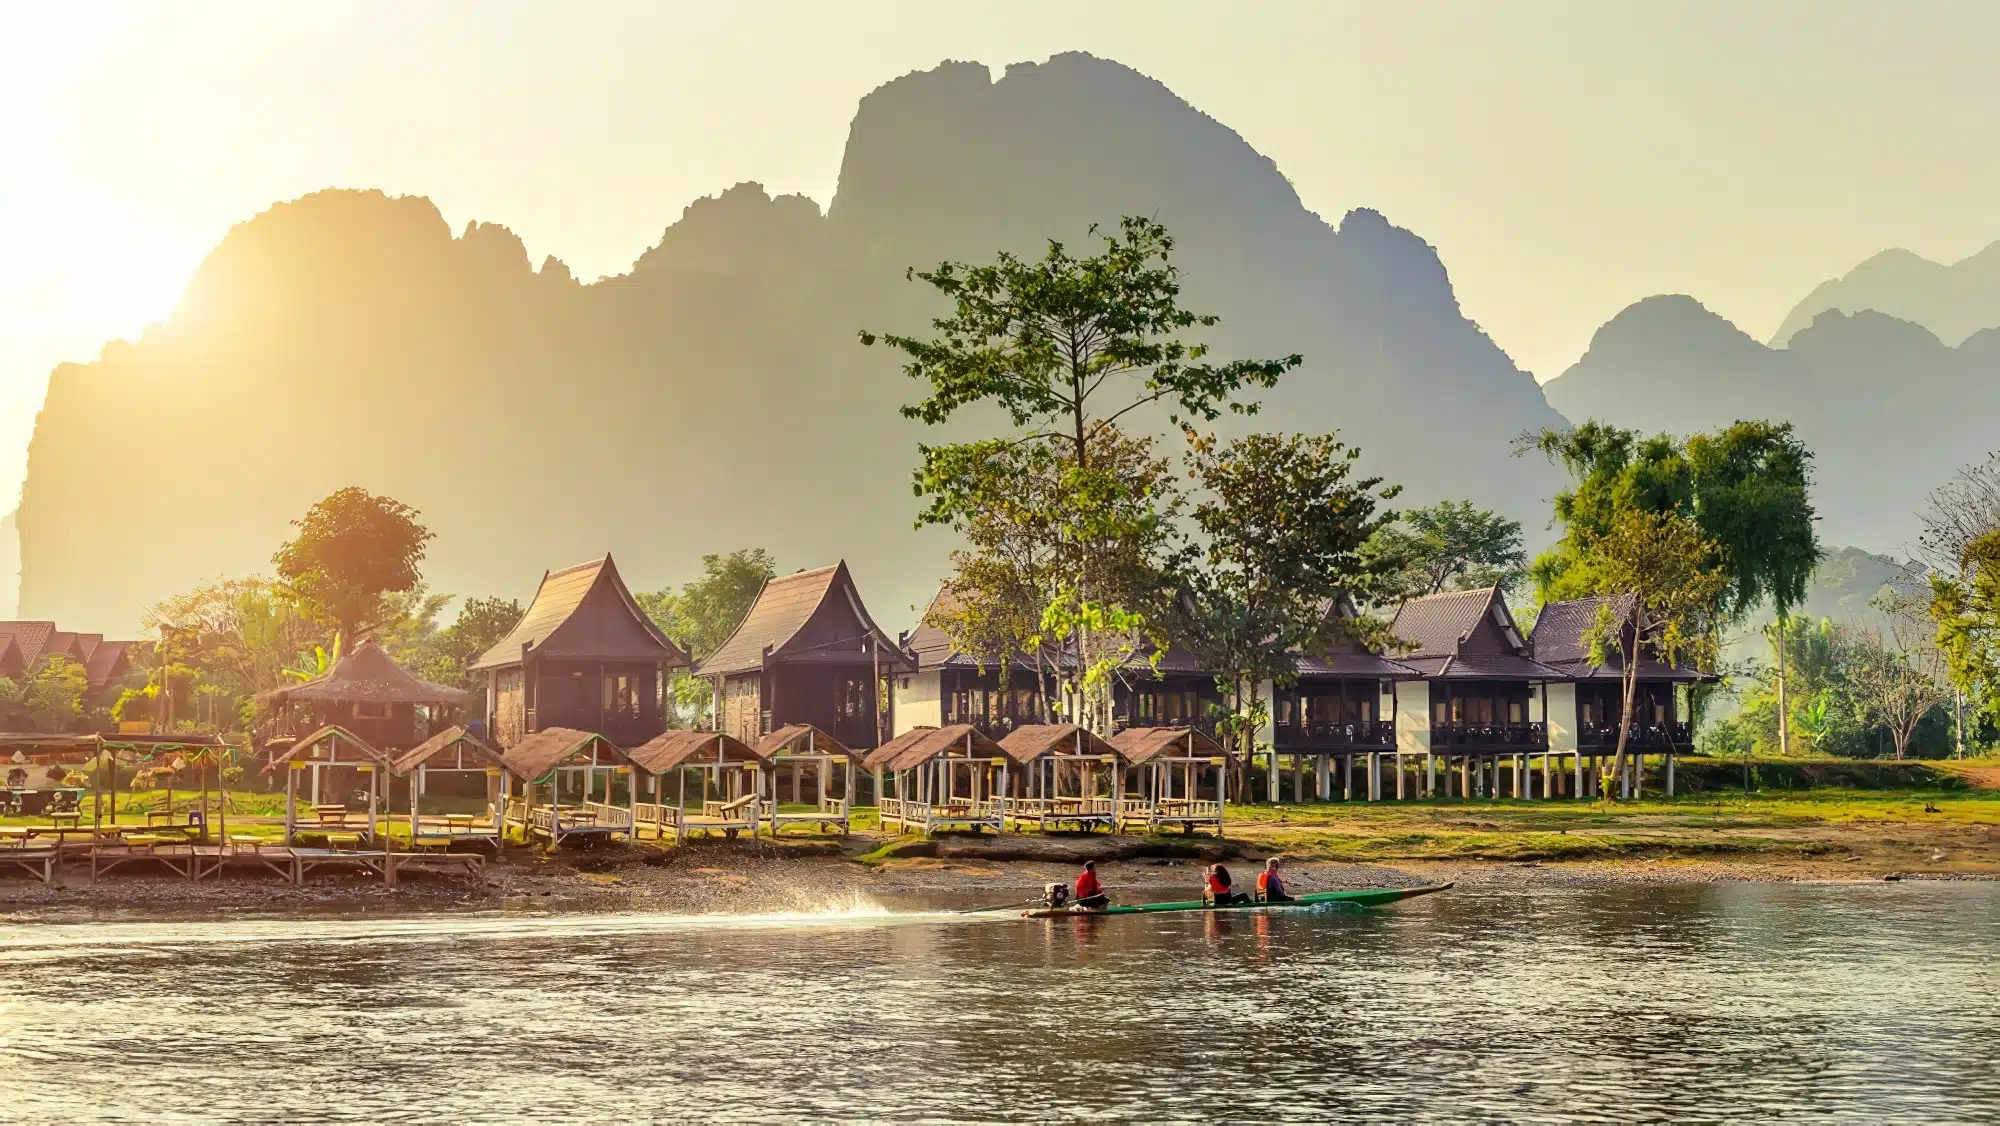 The 15 most beautiful places to visit in Laos